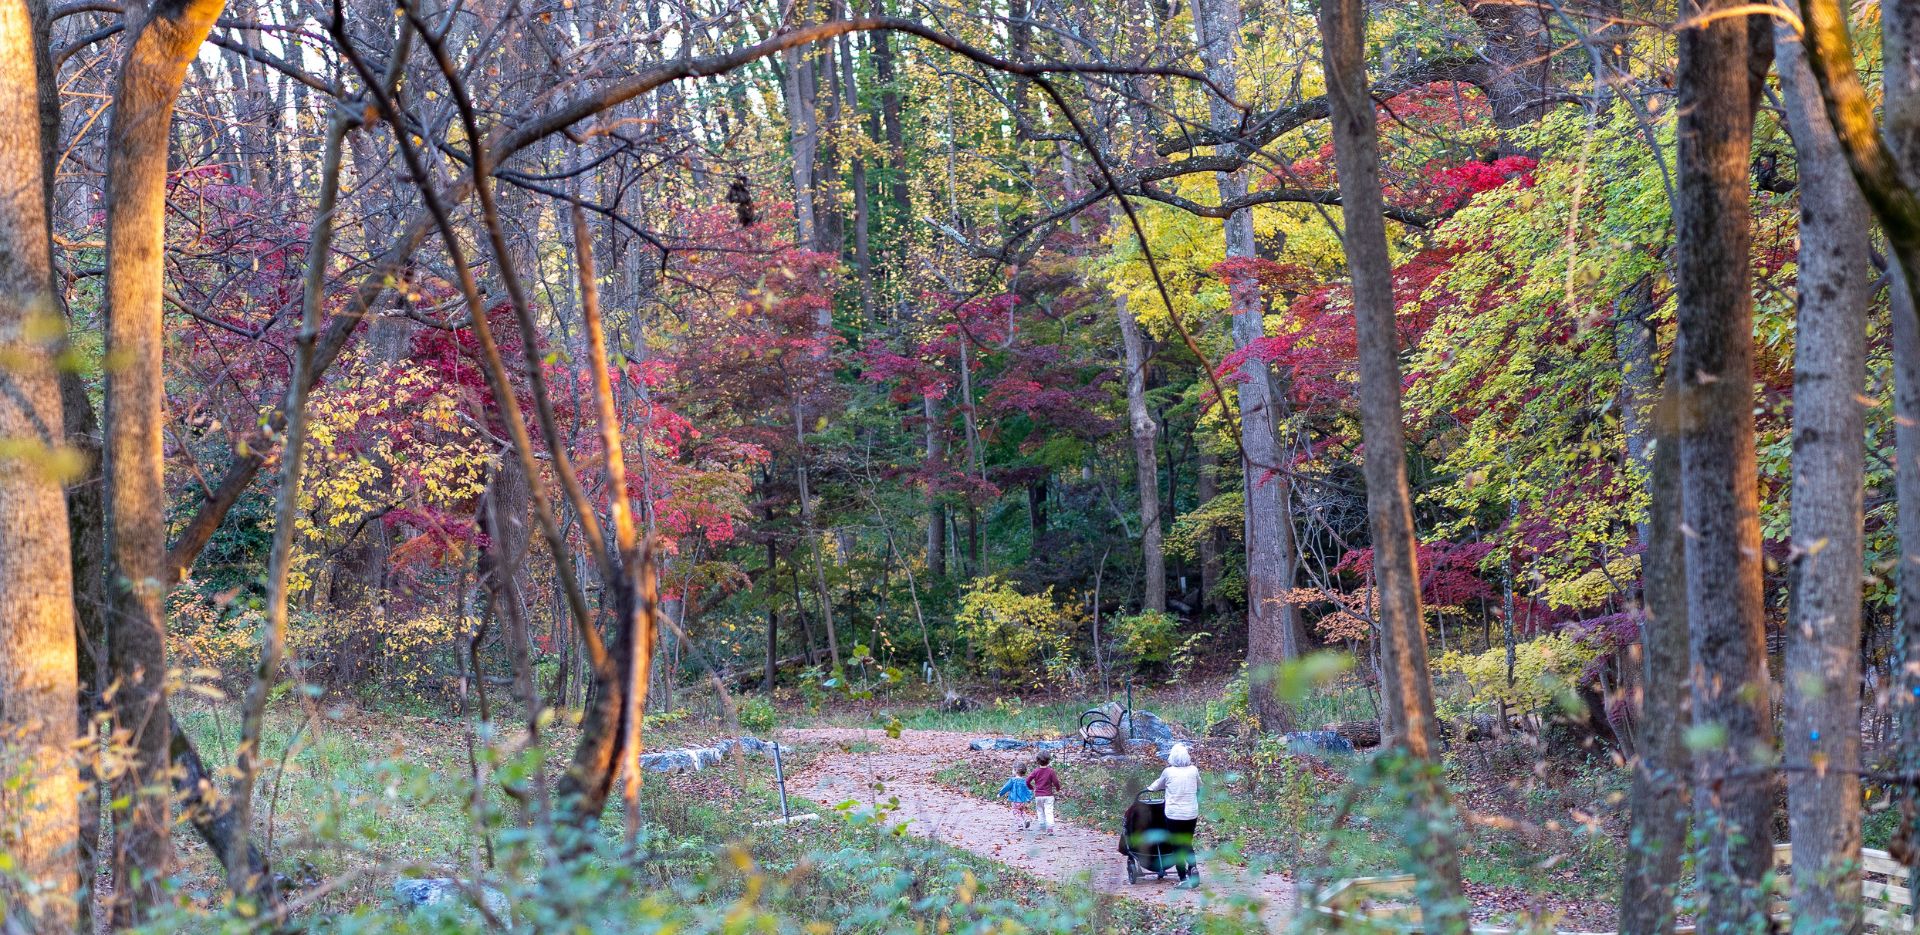 Fall colors in the forest along the accessible trail at Woodend Nature Sanctuary